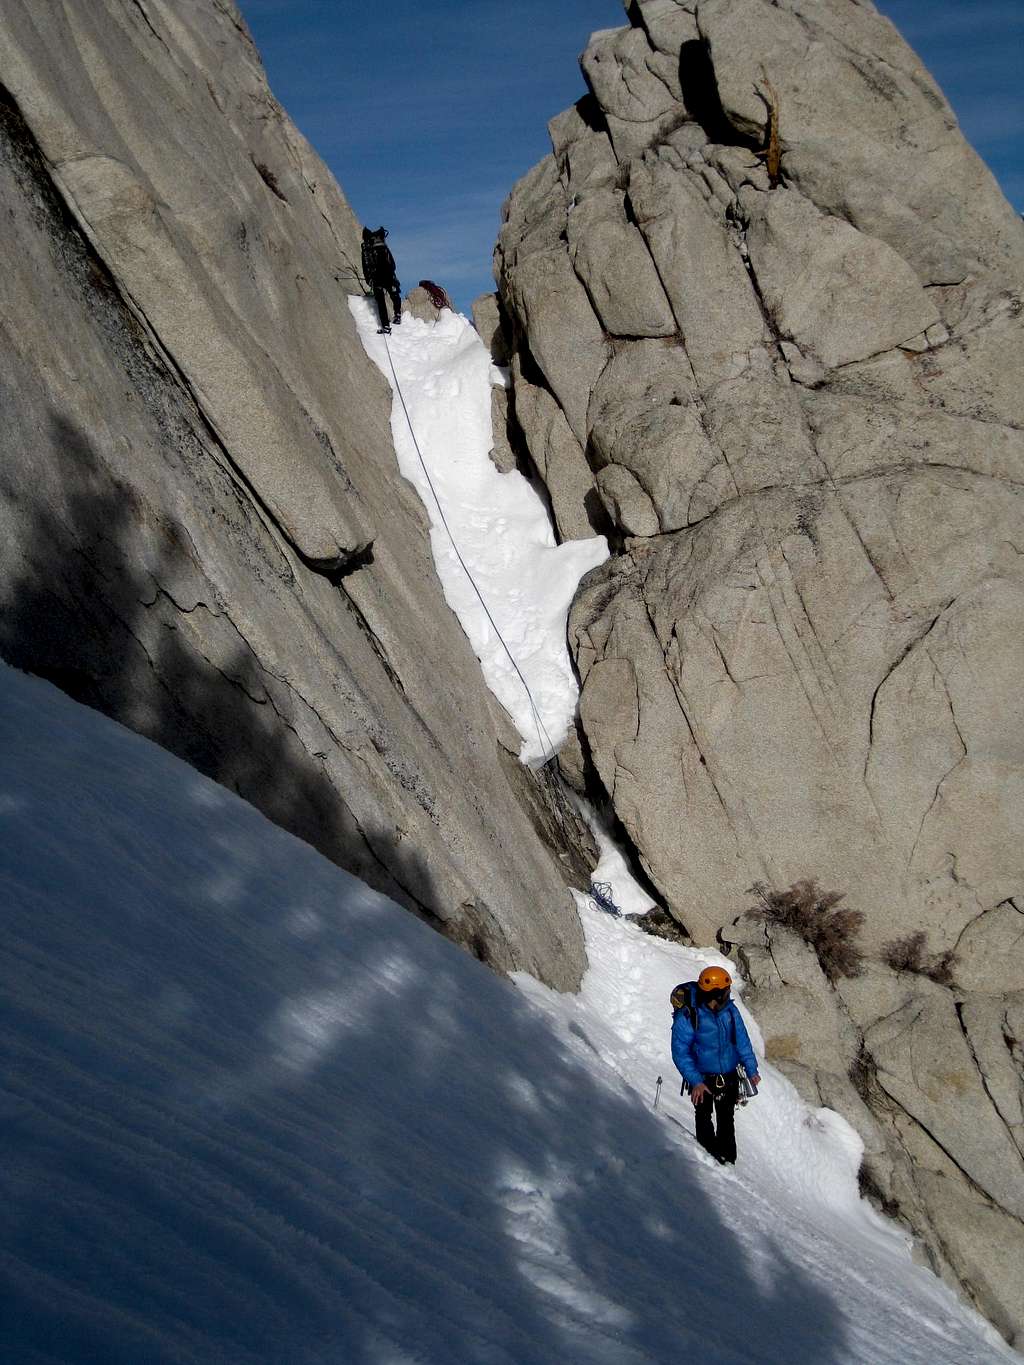 Rappelling the Winter Route notch